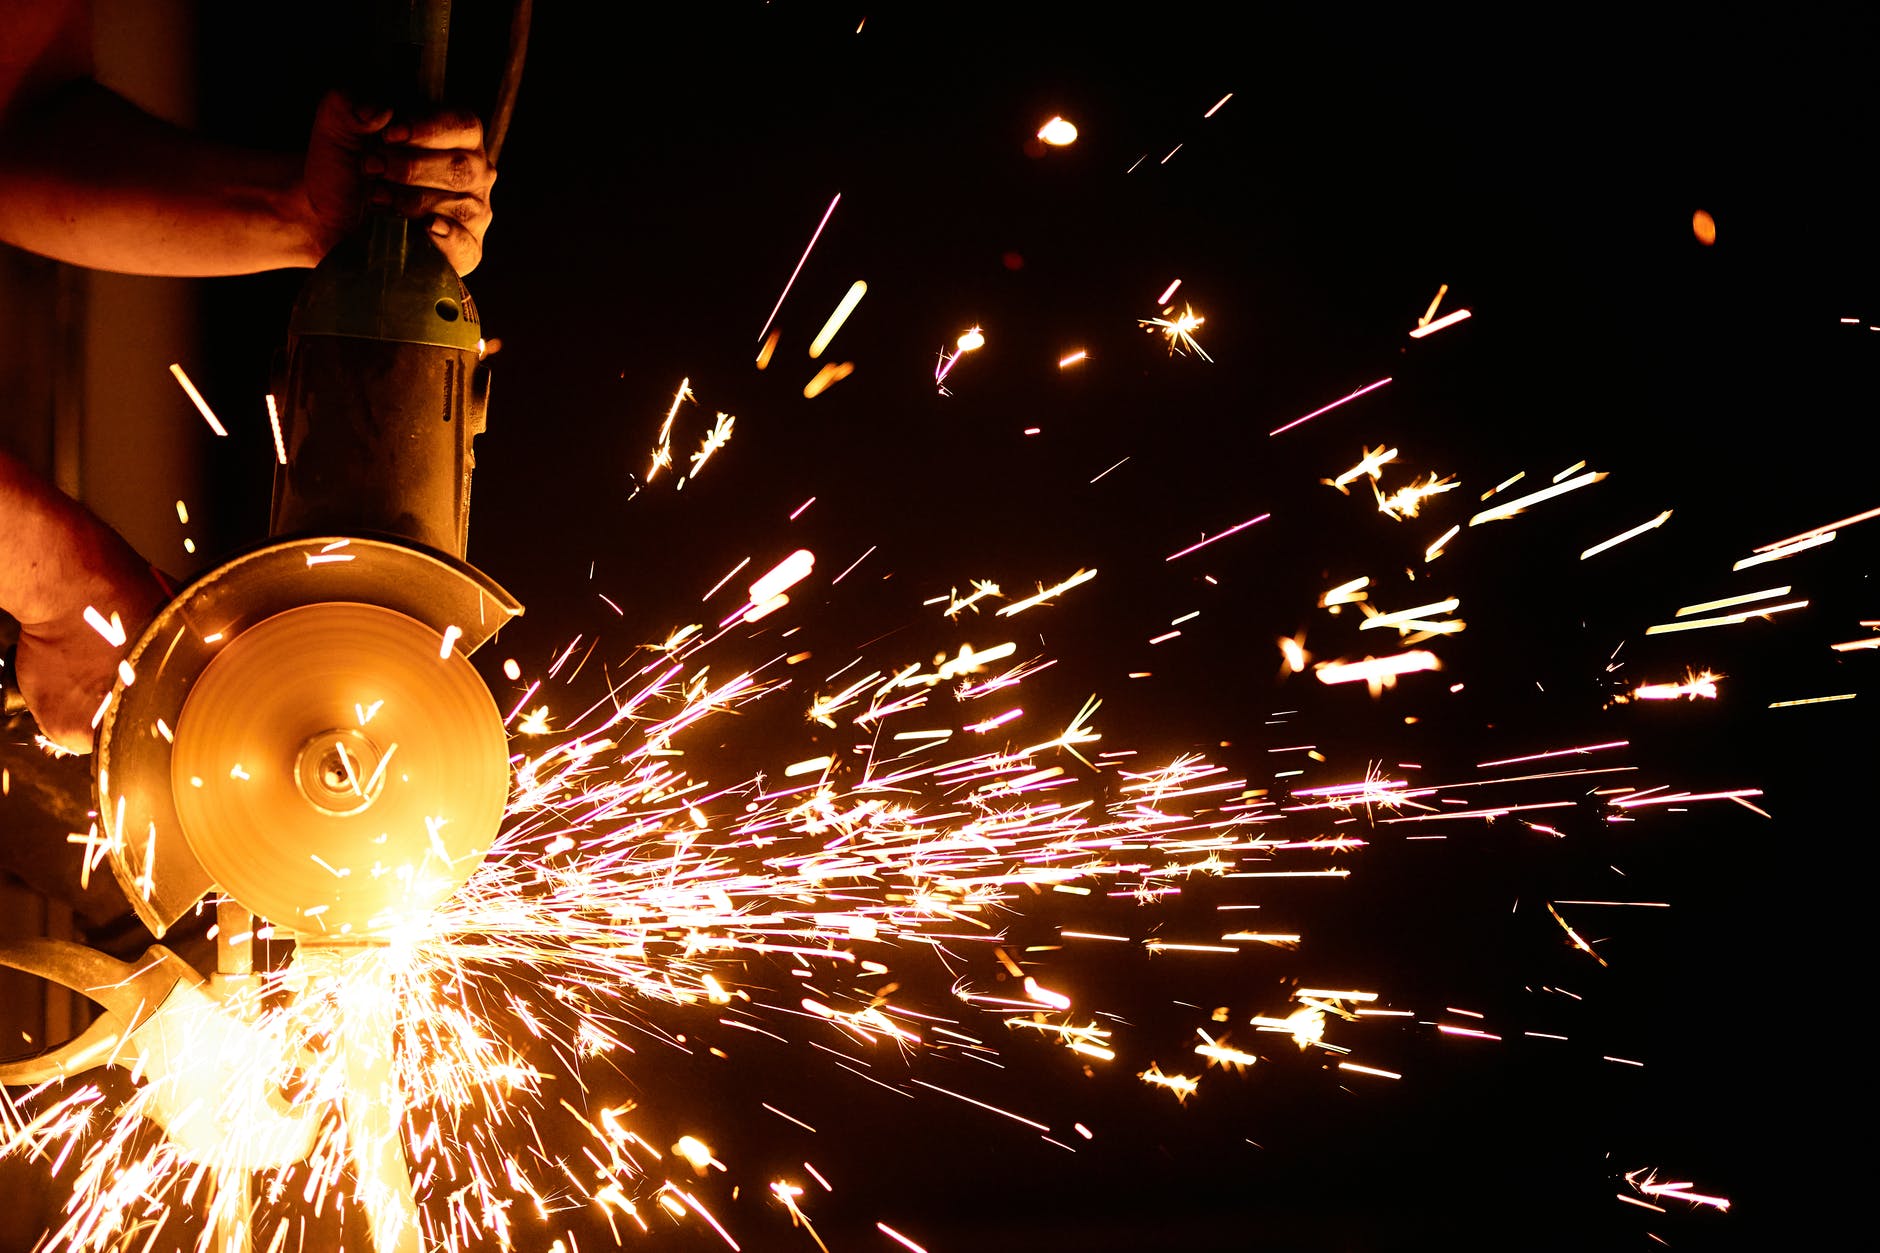 flashing sparks coming from the angle grinder